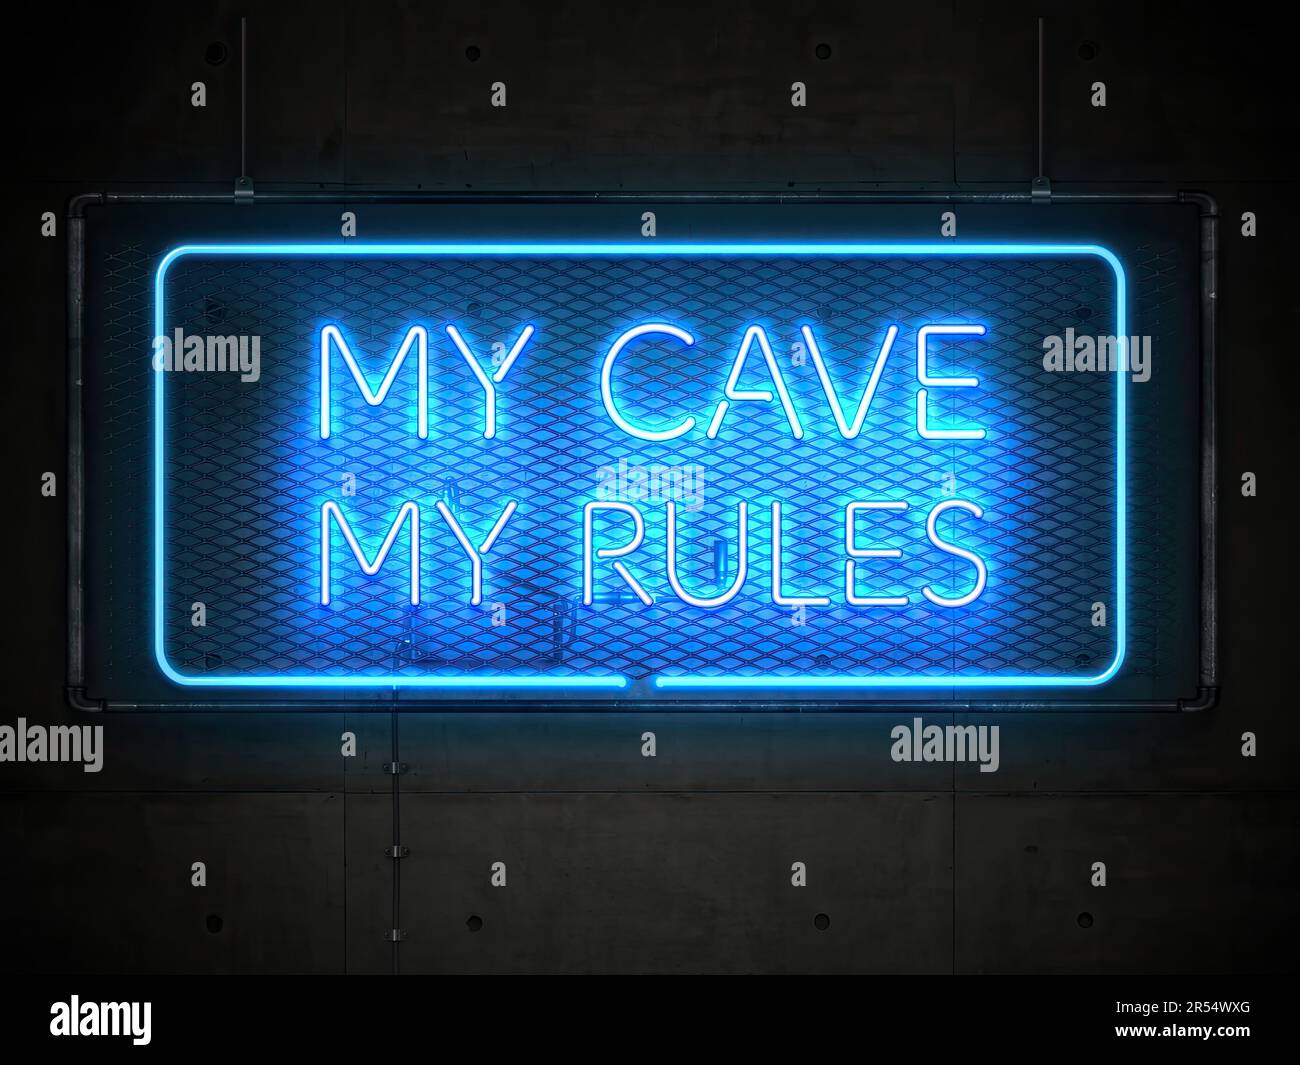 The Man Cave - My Cave My Rules Neon Sign Illustration on a dark background Stock Photo